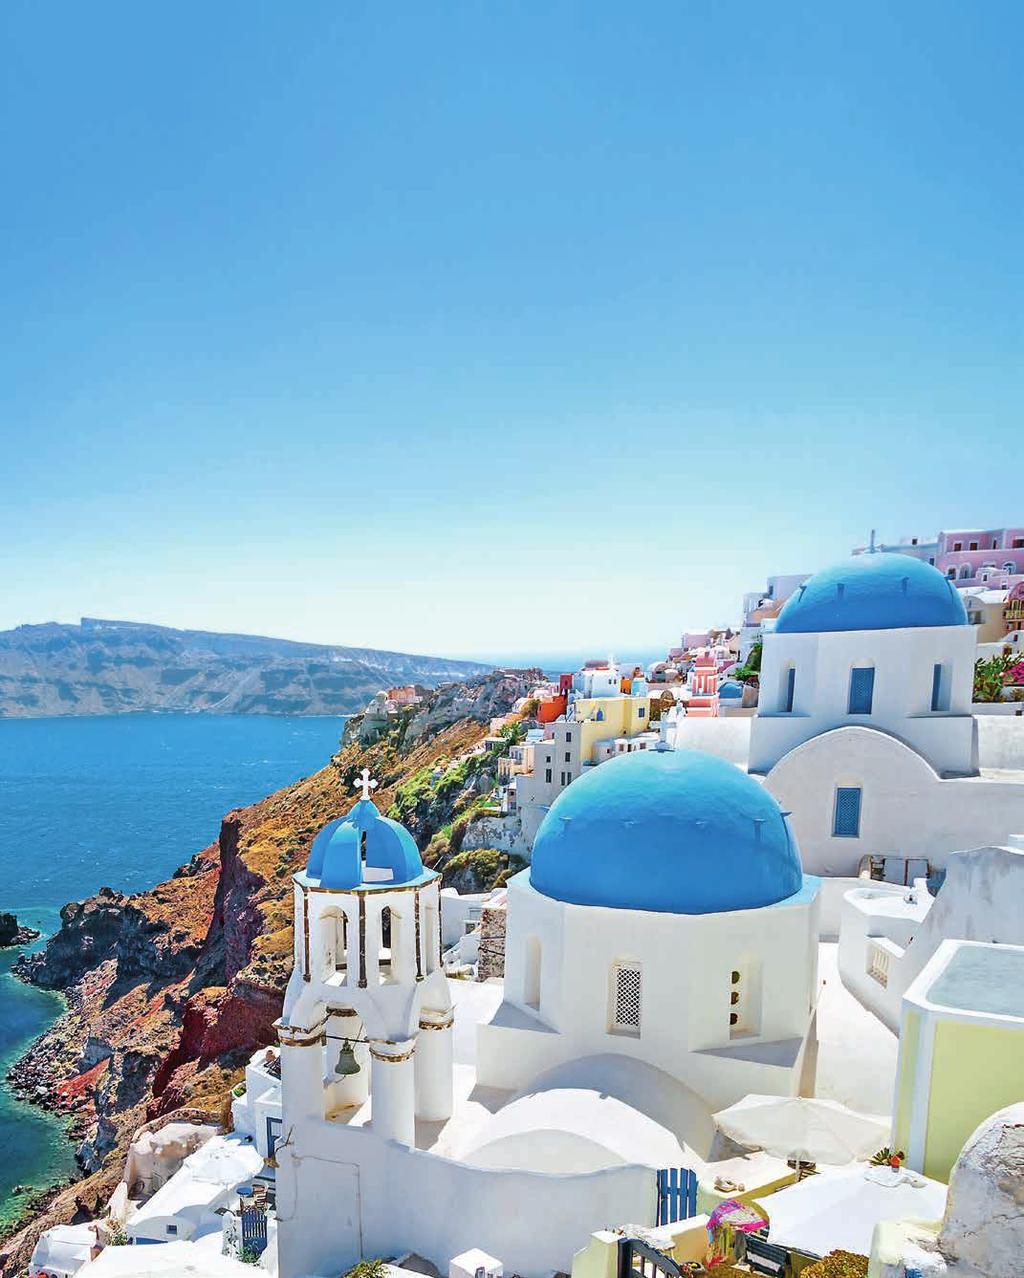 explore Sightseeing in Santorini, named one of the 7 Cruise Wonders of the World by Condé Nast Traveler, can include a variety of experiences, no matter what you hope to discover.